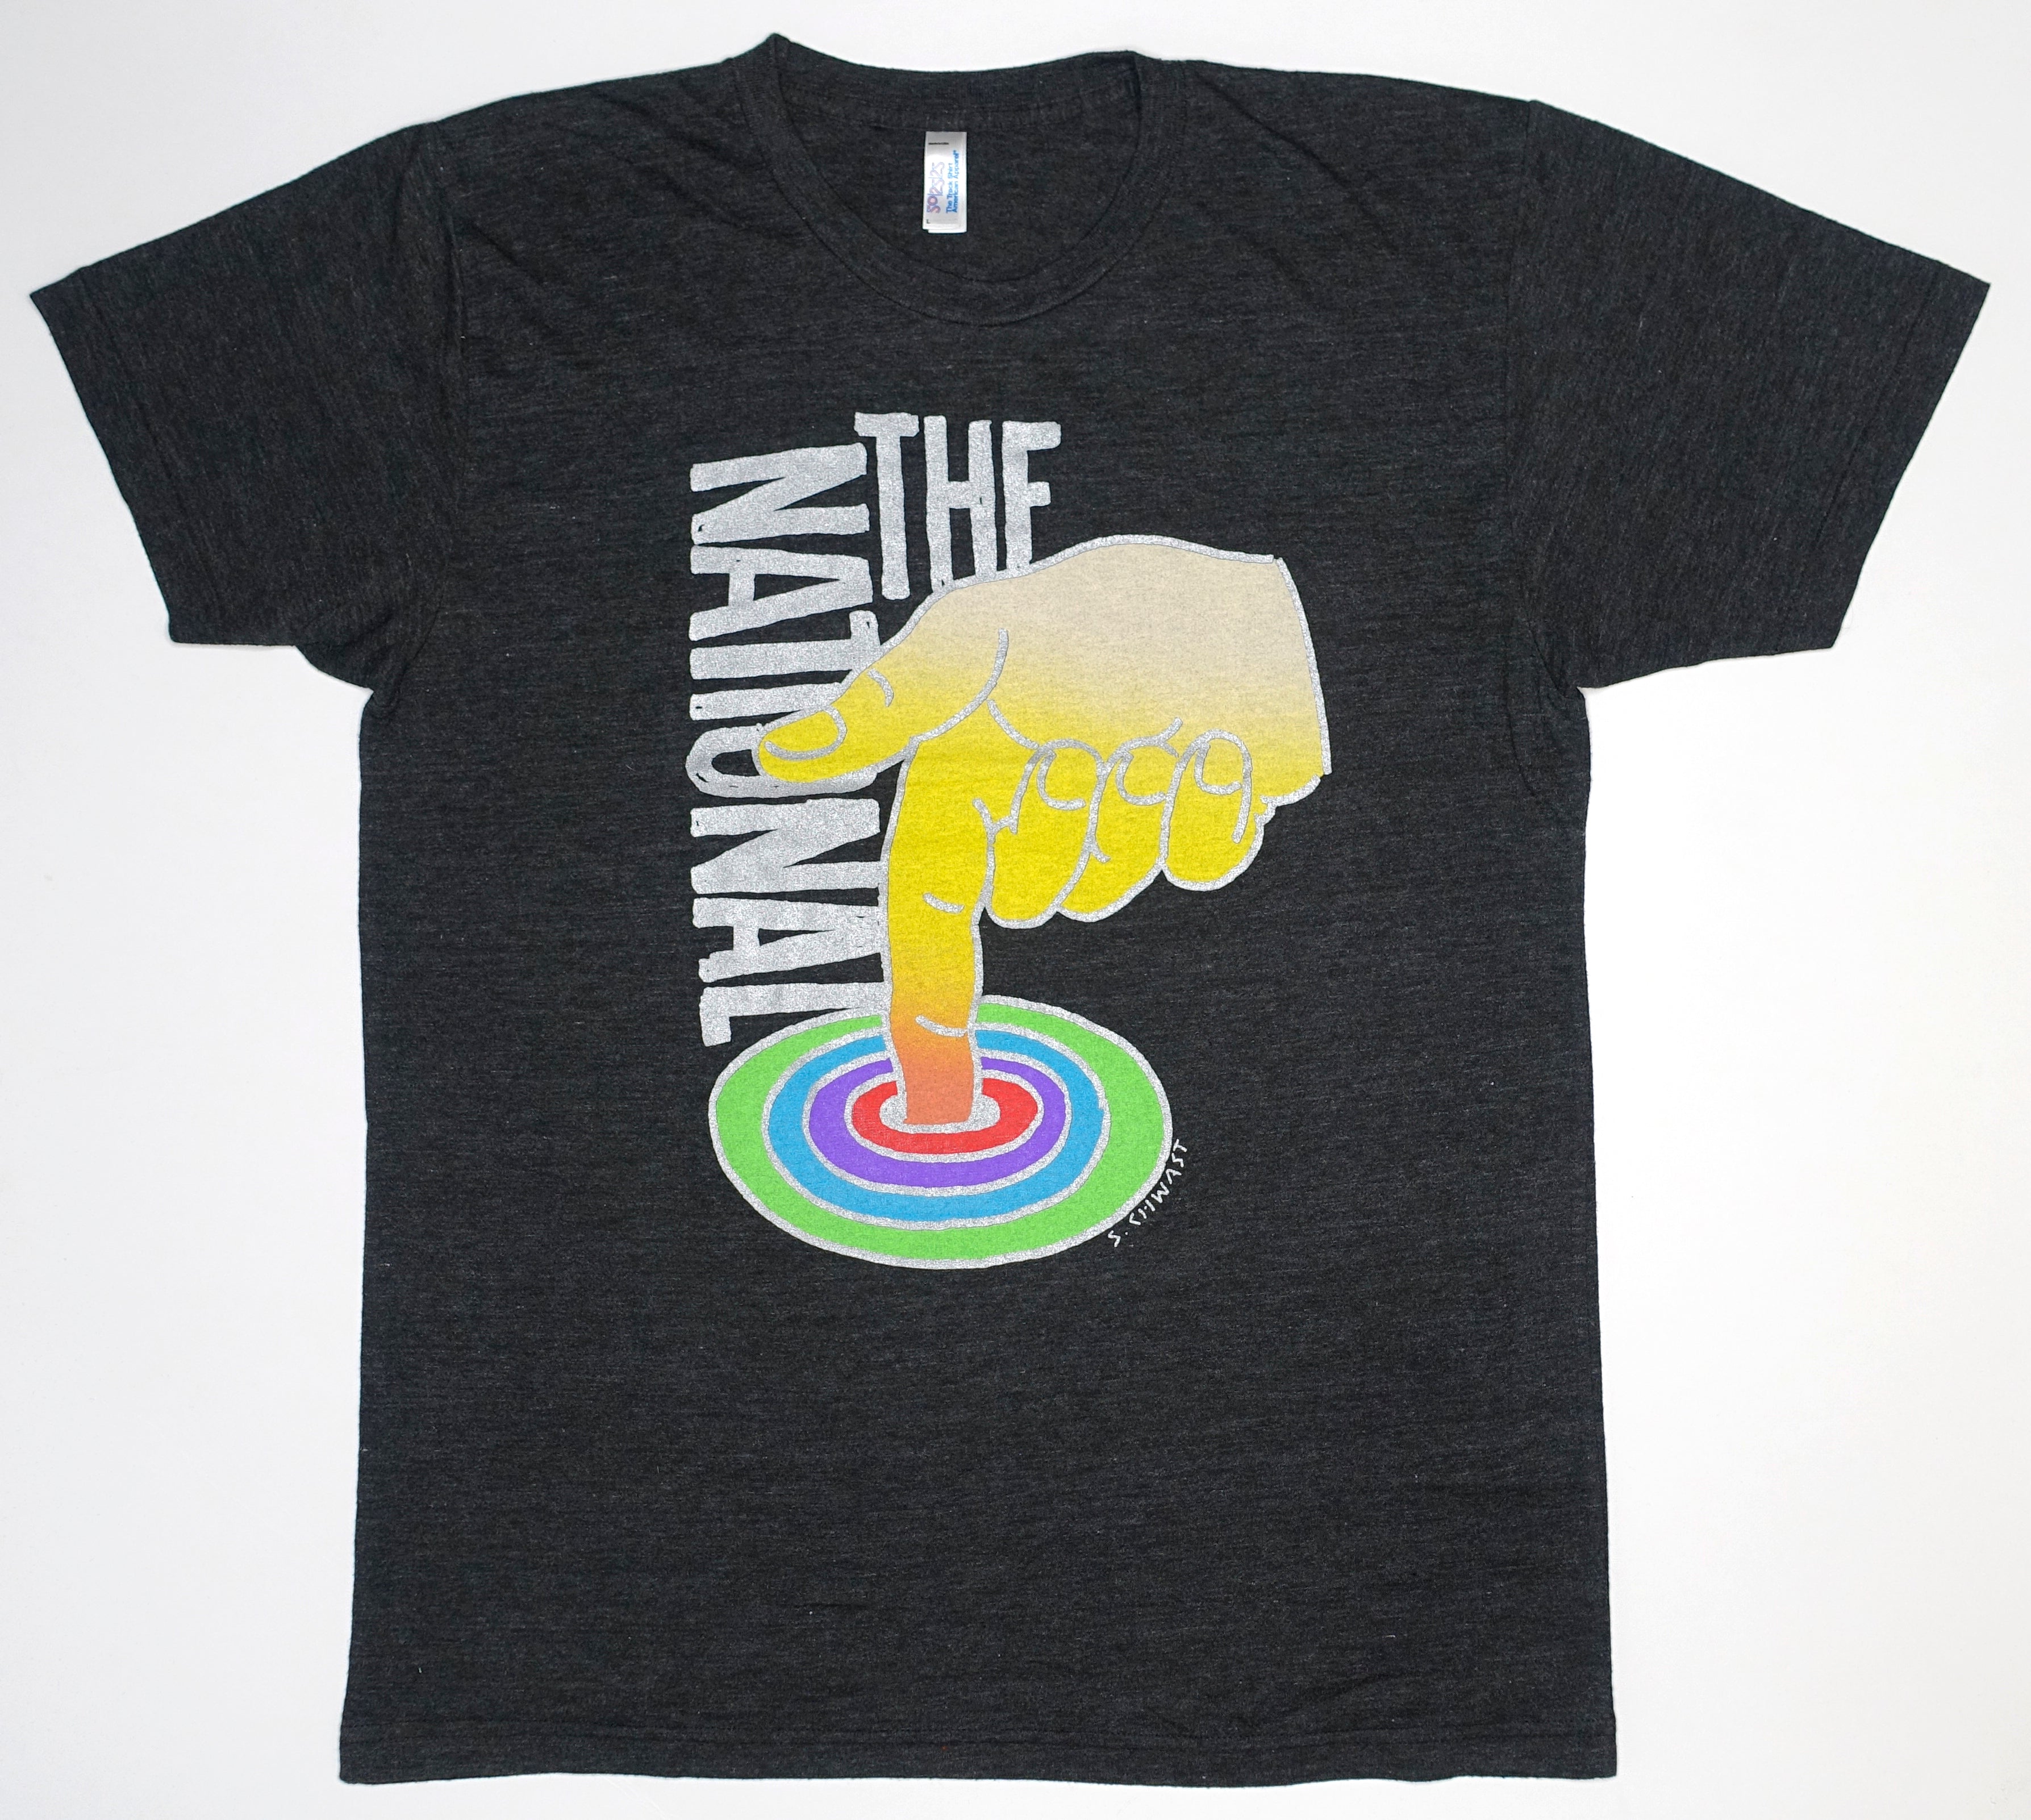 the National - Finger On The Pulse / Trouble 2013 Tour Shirt Size Large